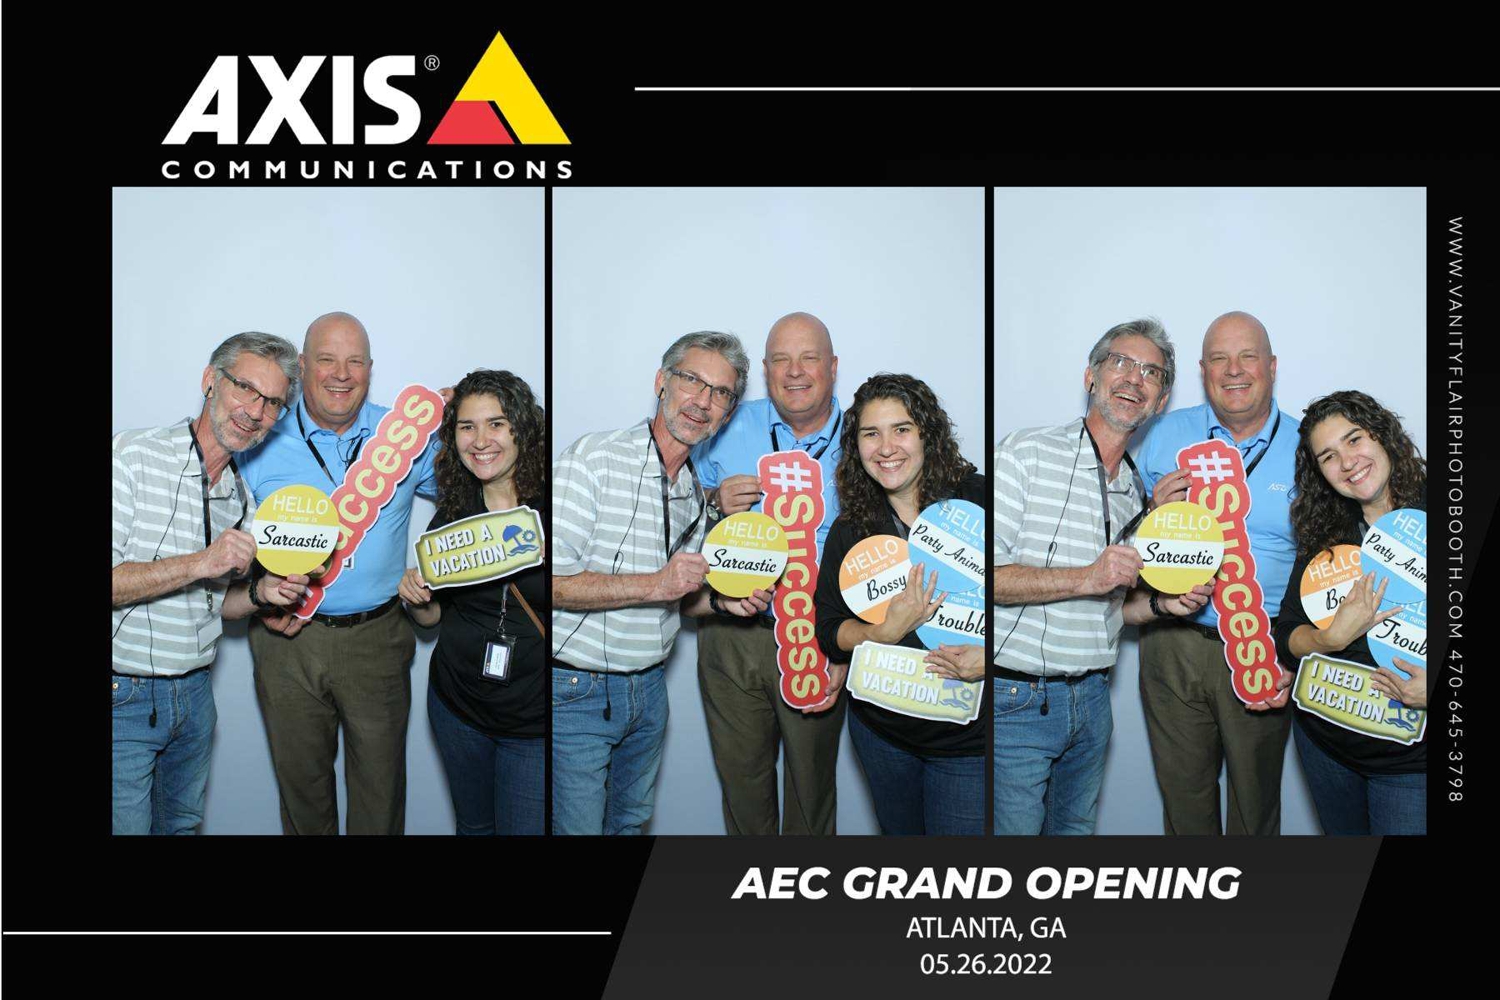 Pursue Knowledge is one of our core values. Several team members attended an AXIS training and tour of their new facility.